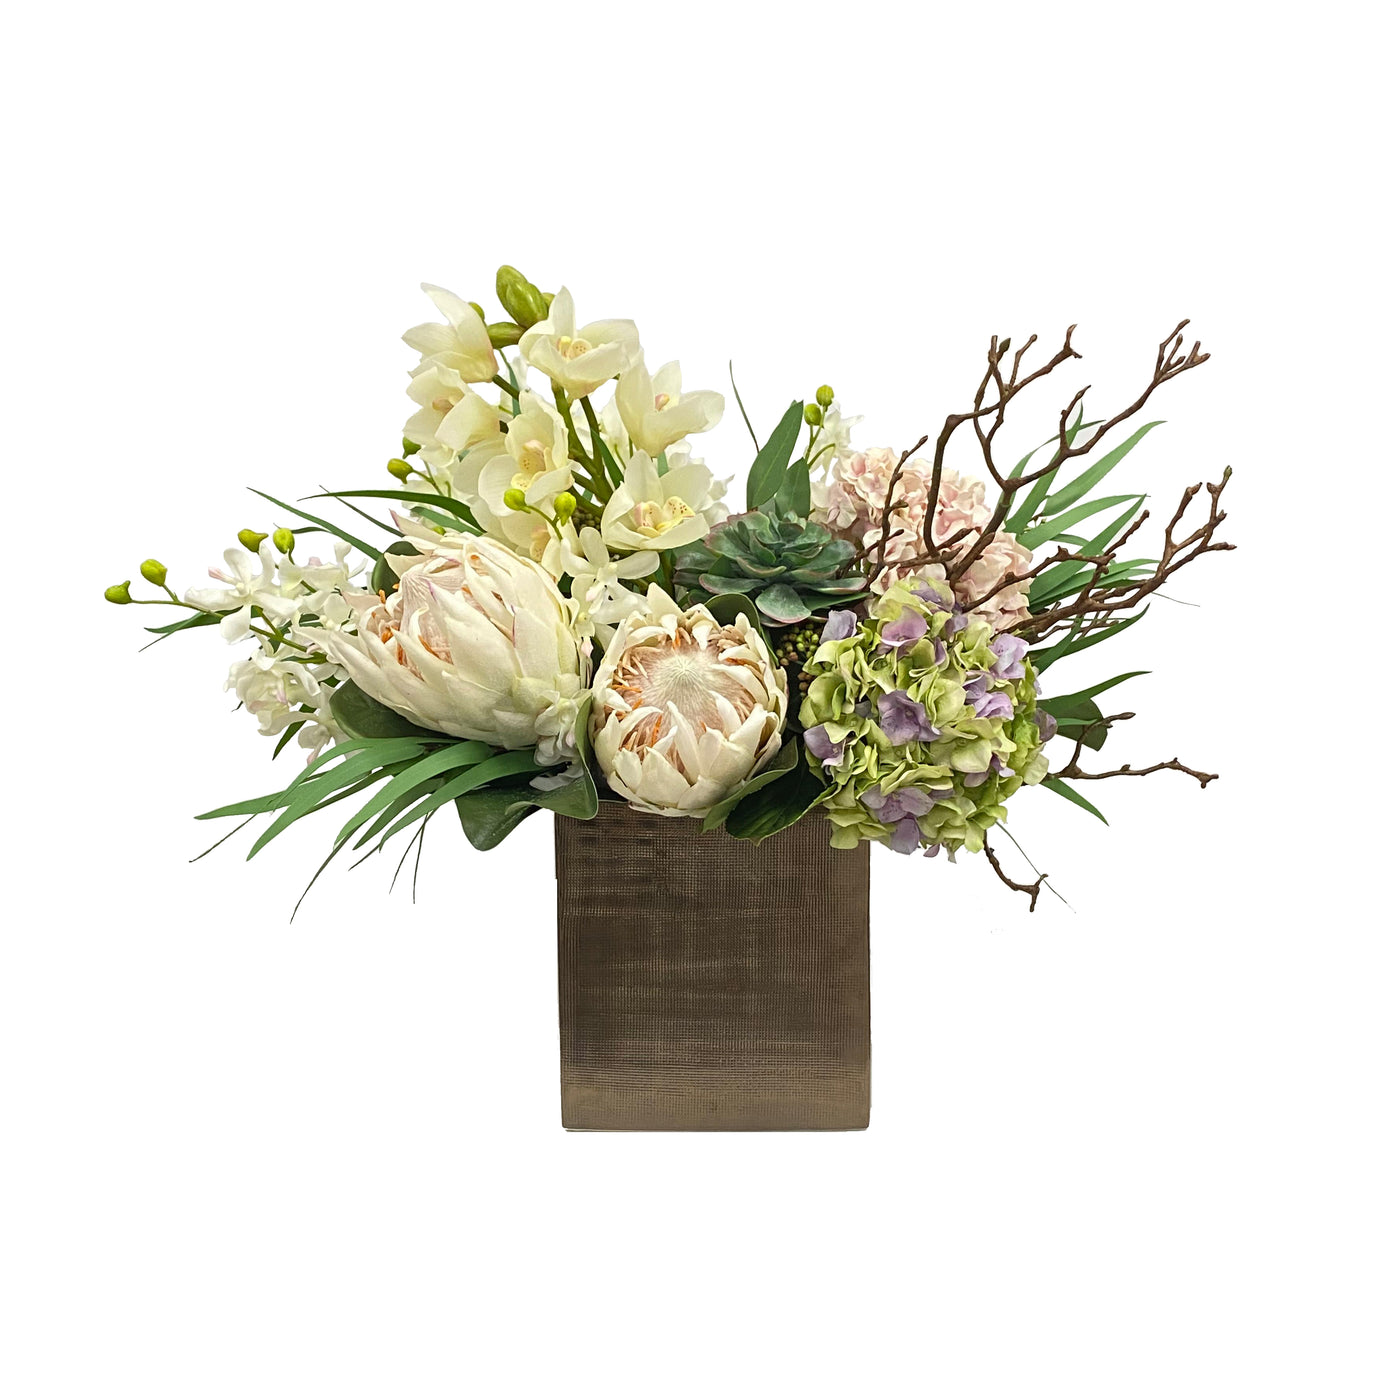 Orchid & Protea in Artisanal Planter 22"